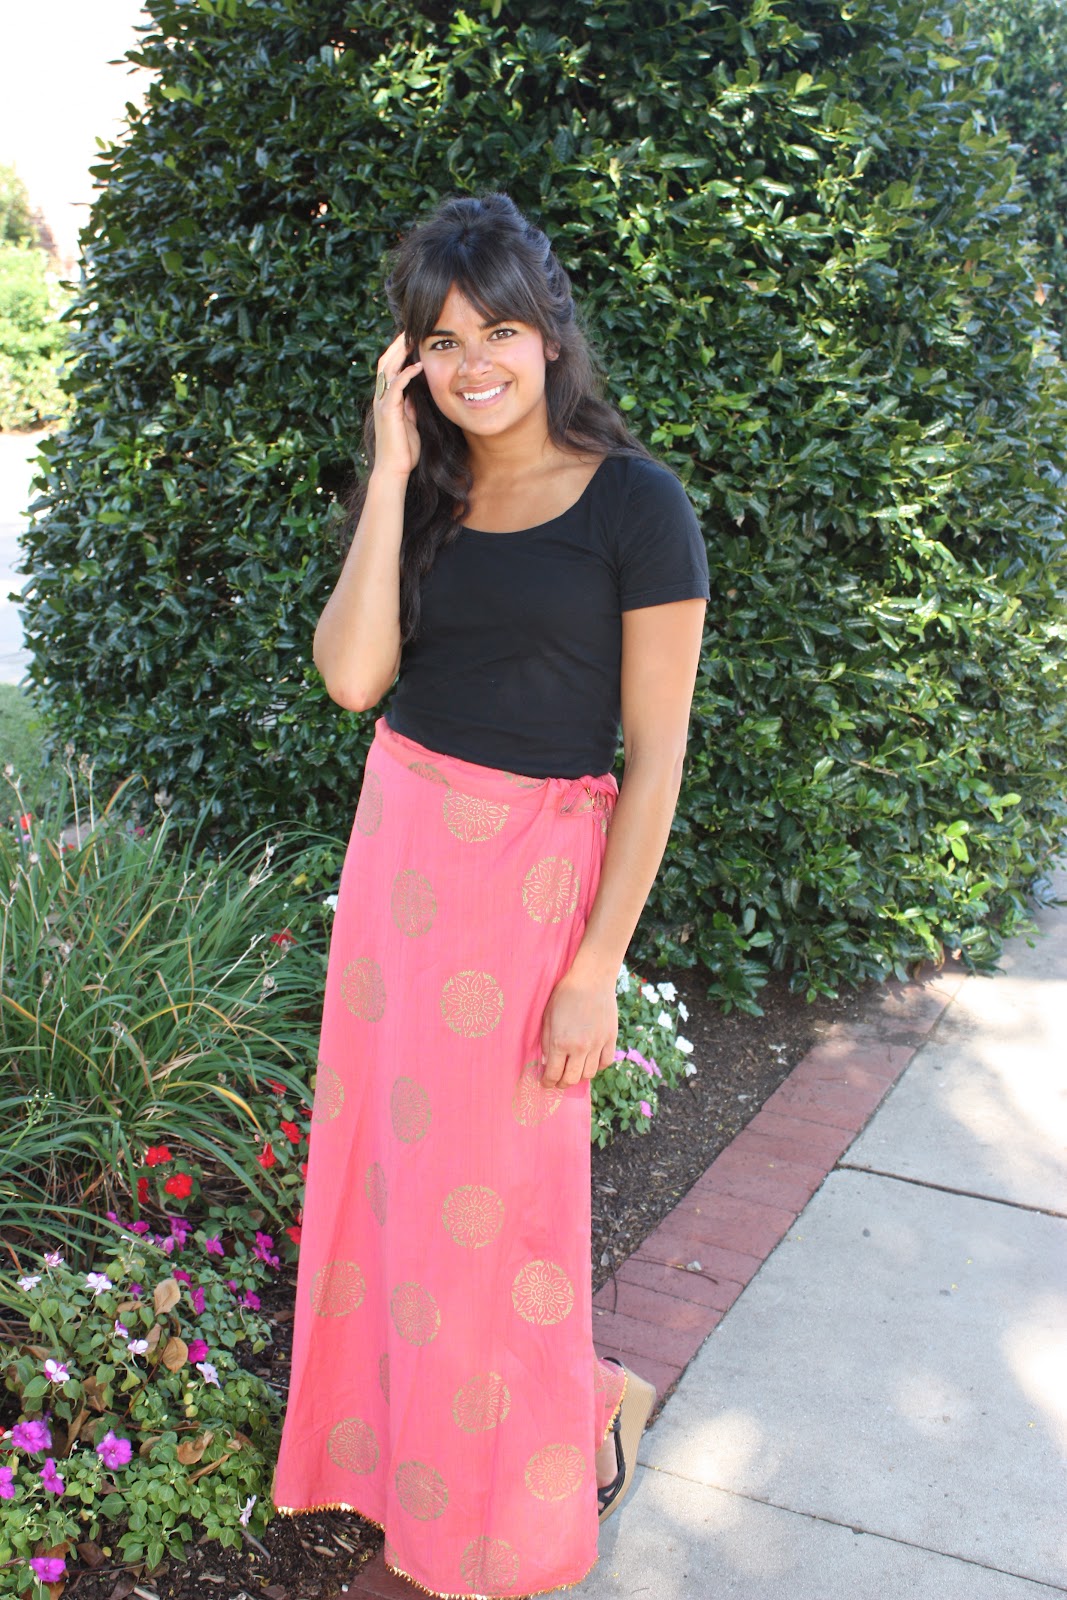 stolen skirts and snappy shots | Priya the Blog | life & style in ...